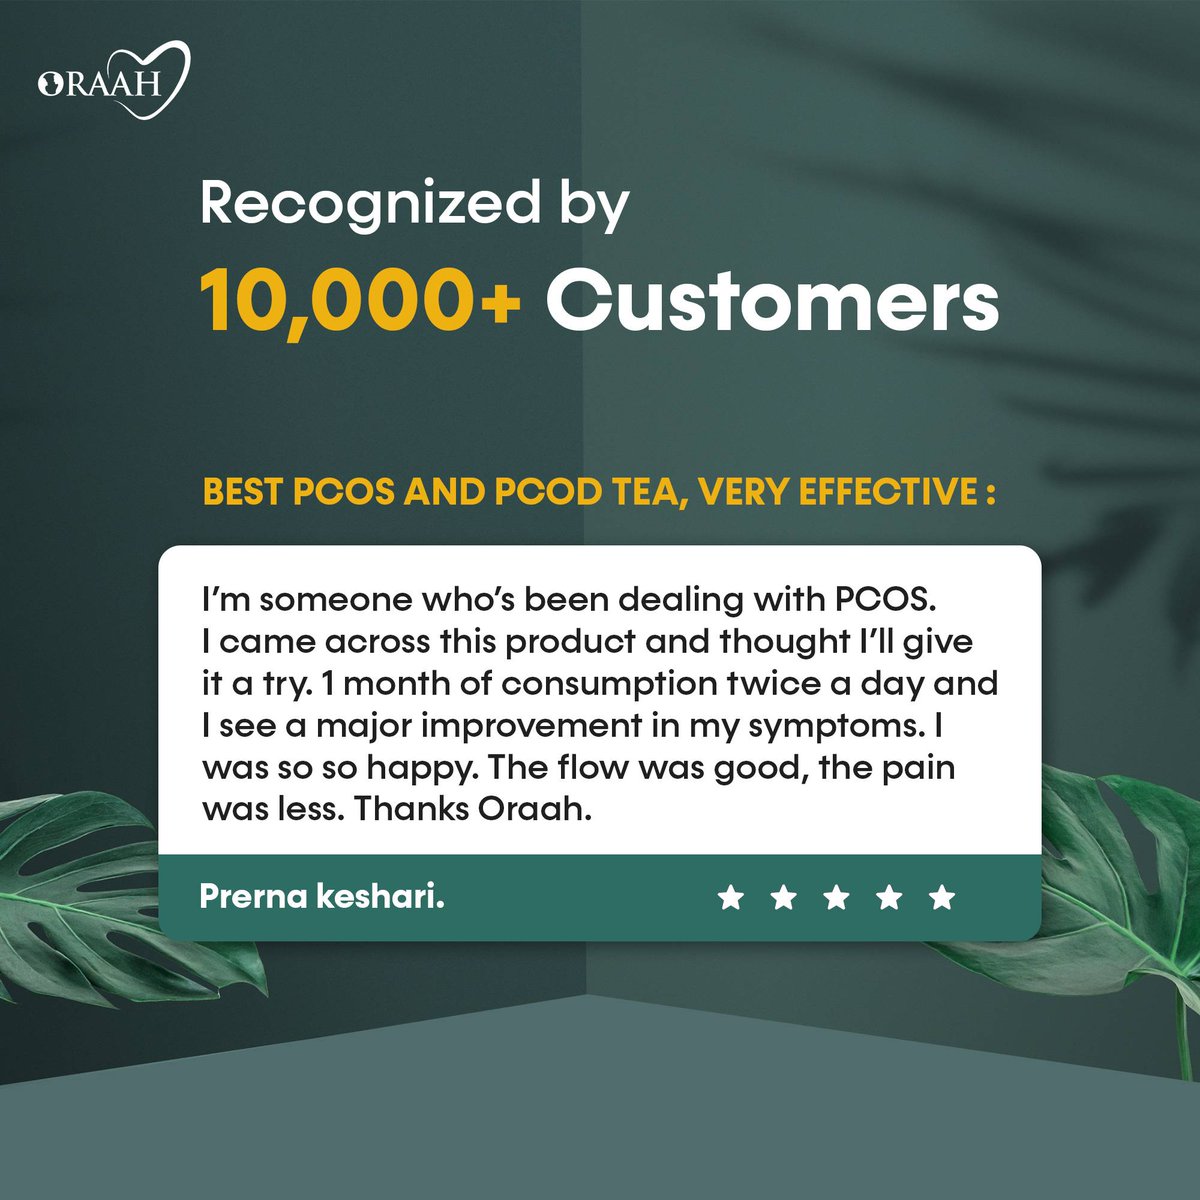 Reviews like these make our day!☺
Thank you Prerna keshari for your review🤗

Want to ask us anything? Drop your queries in the comments below 👇

#review #healthcare #love #health #oraah #ReviewPost #positivereview #reviewtime #pcos #pcodtea #pcod #irregularperiods #cramppain